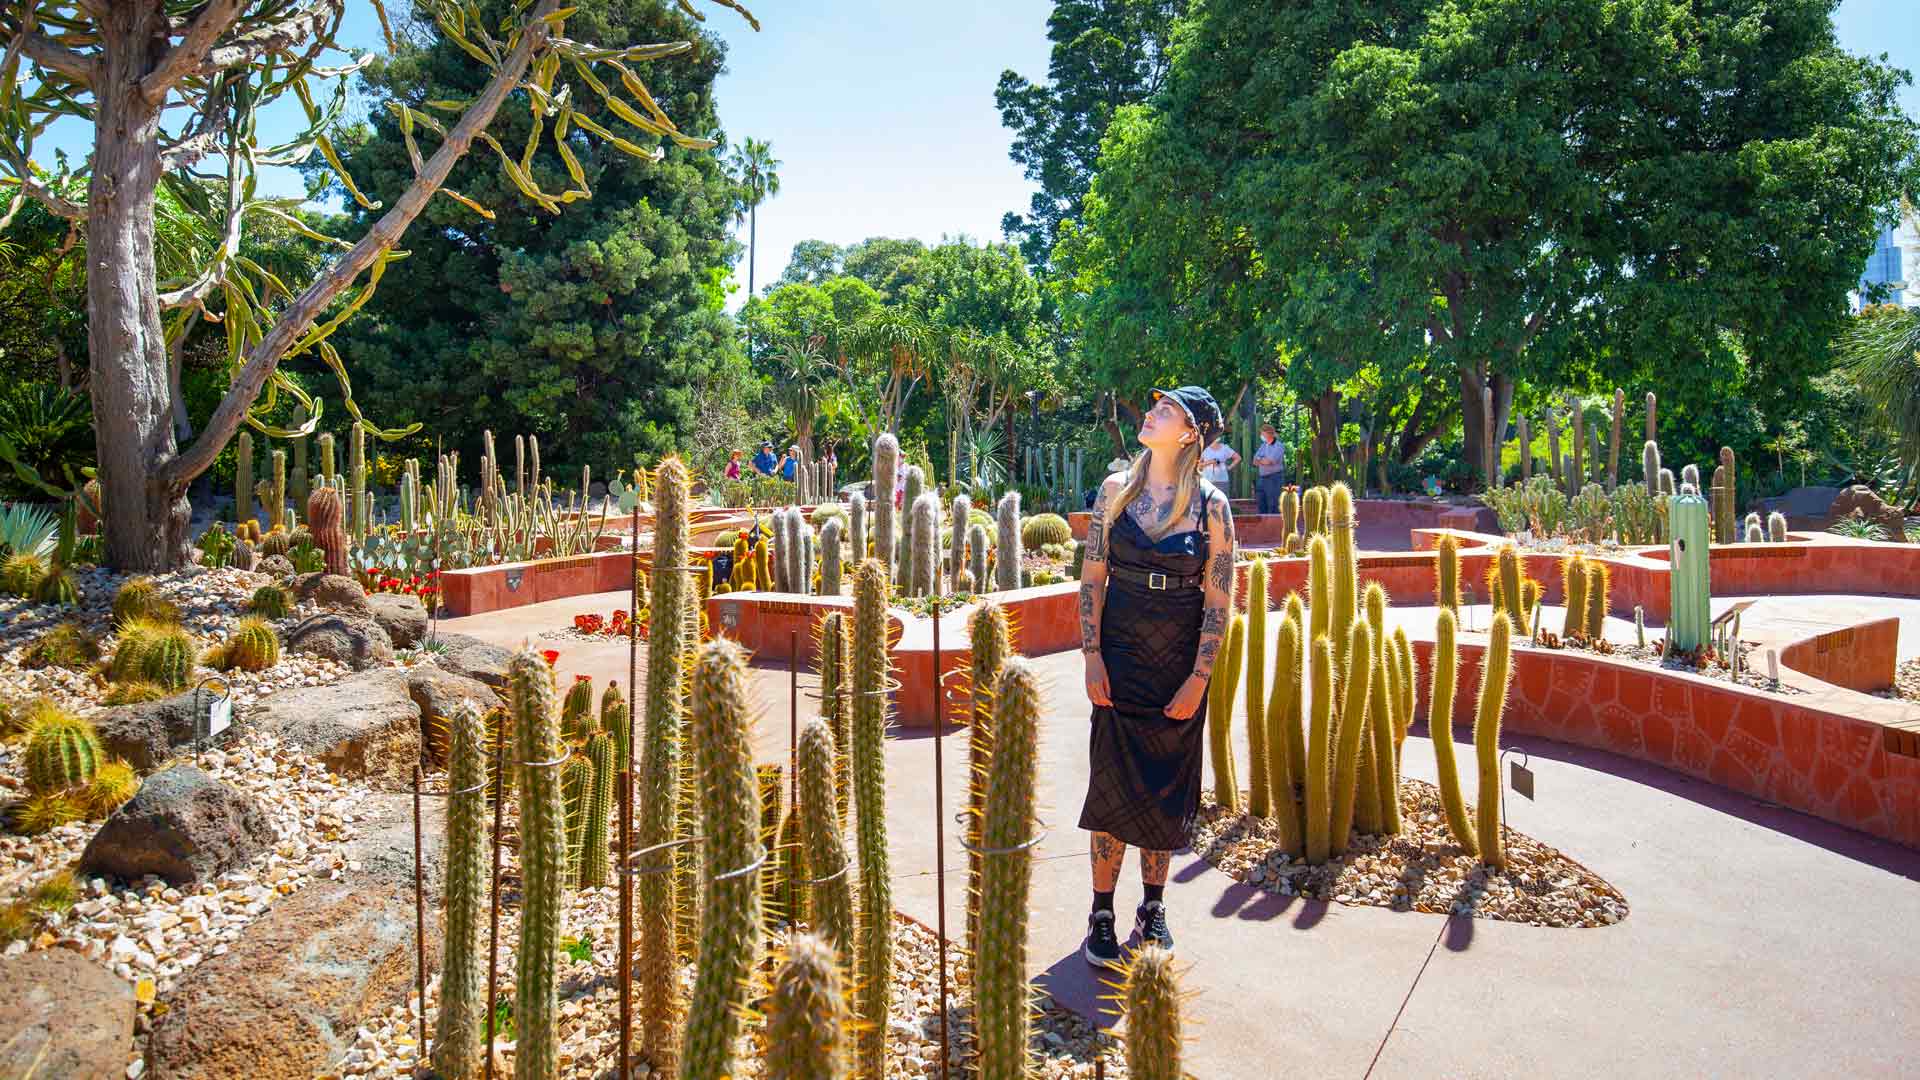 Melbourne's Royal Botanic Gardens Is Now Home to More Than 3000 Cacti and Succulents